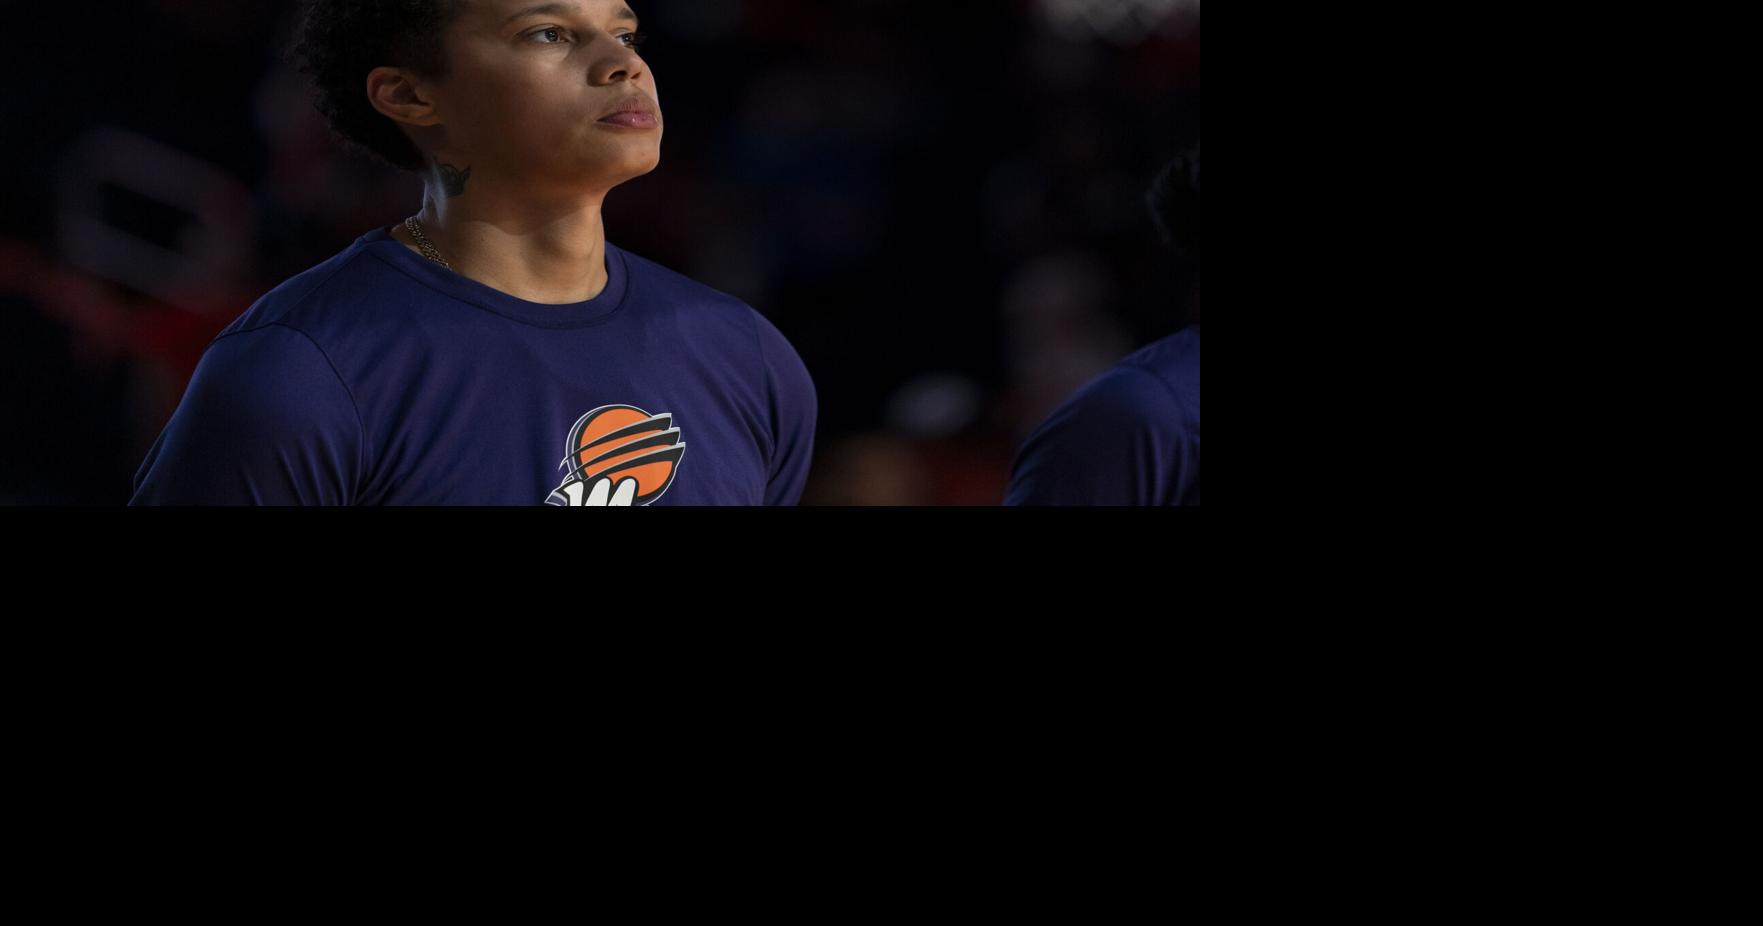 Griner's WNBA return not a fairytale, but there were still plenty